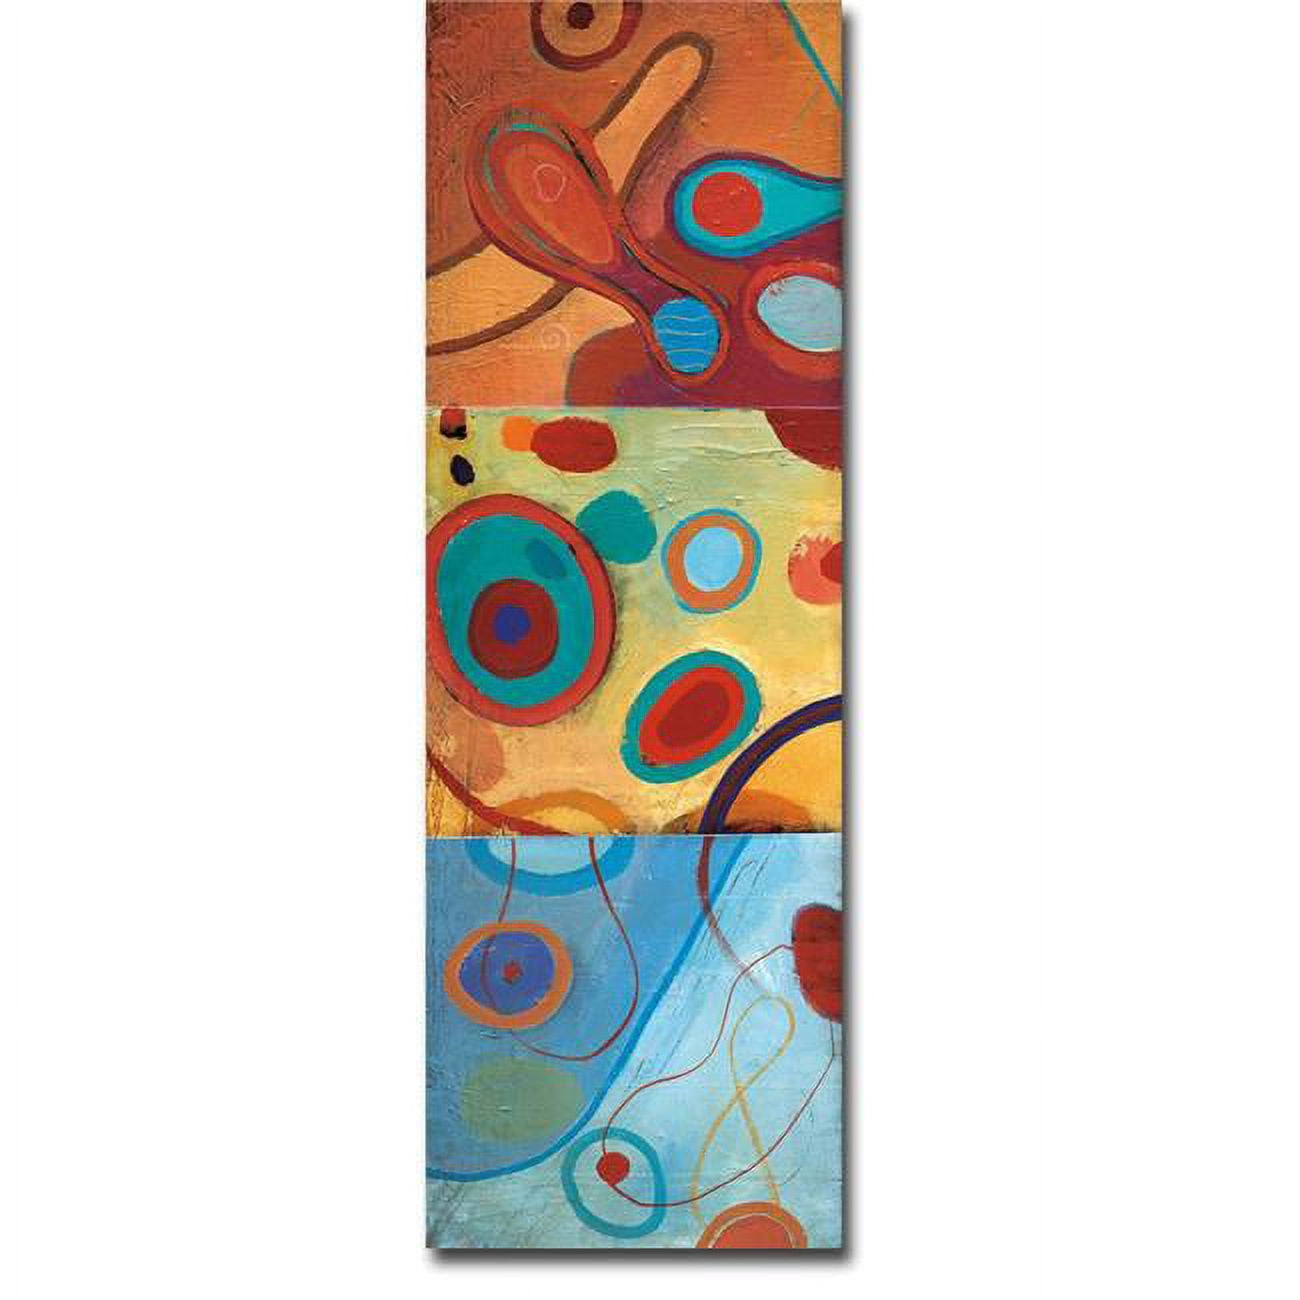 1236u677cg String Theory Ii By Don Li-leger Premium Gallery-wrapped Canvas Giclee Art - Ready-to-hang, 12 X 36 X 1.5 In.